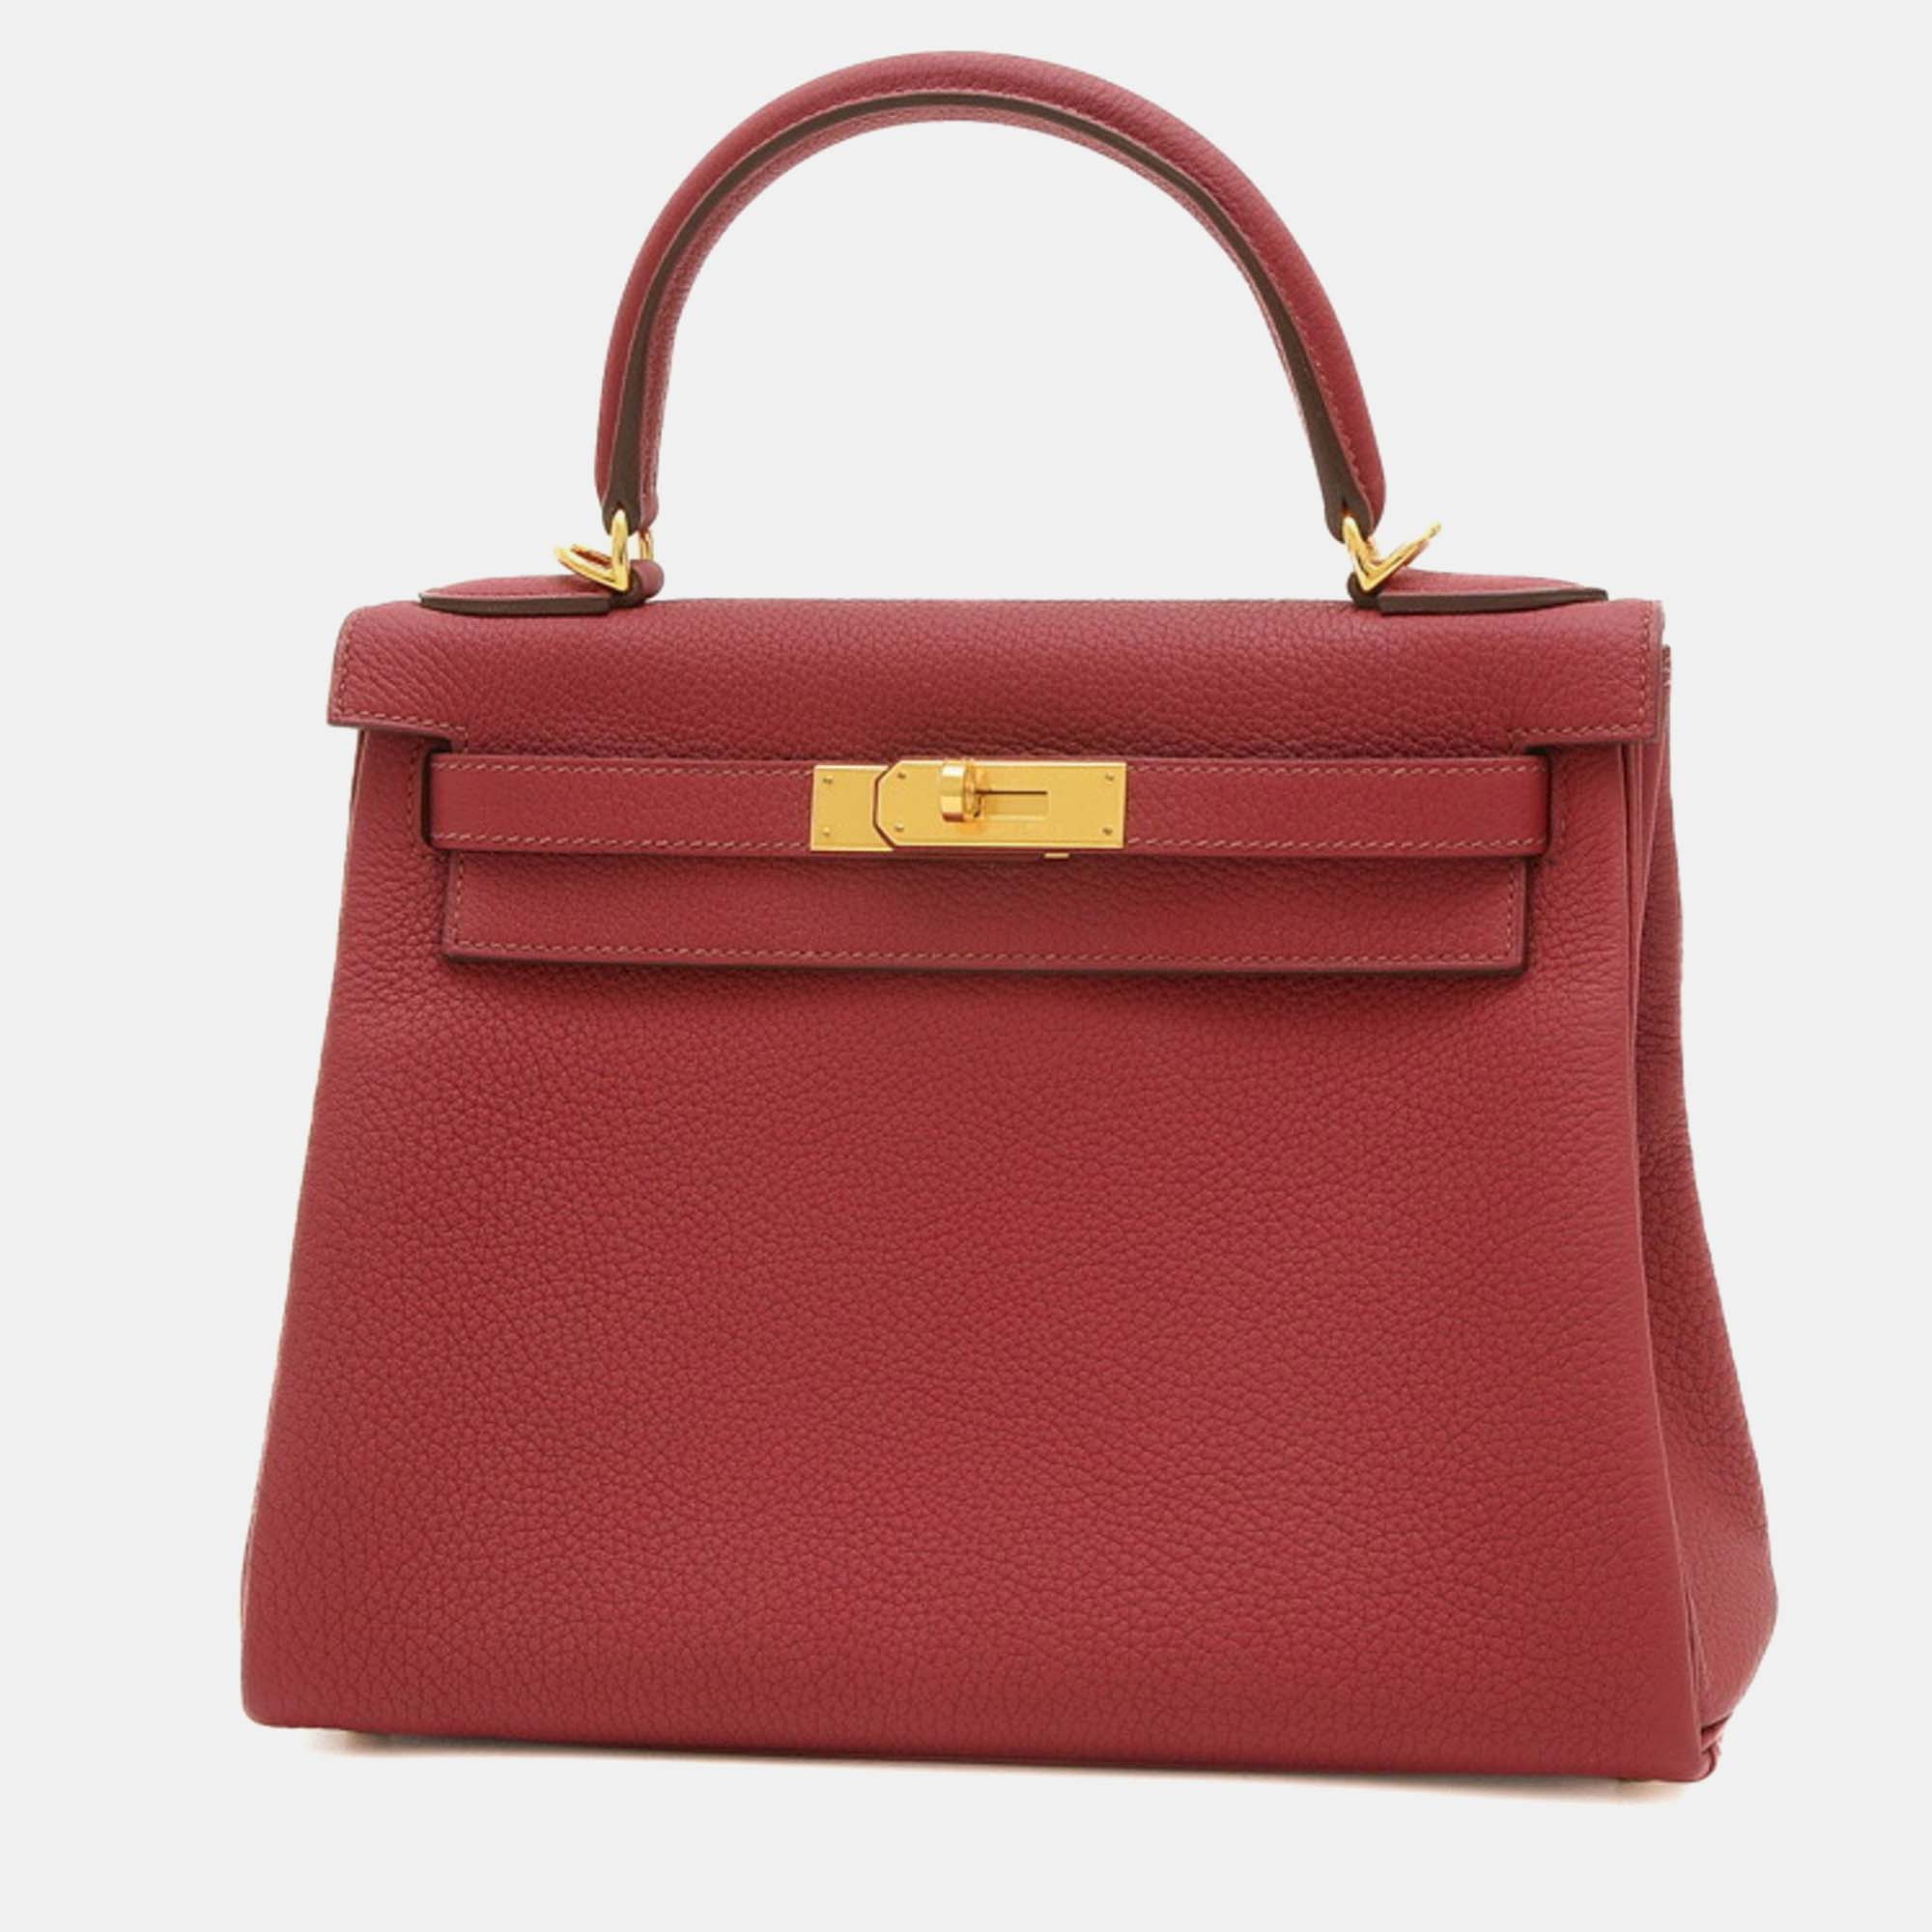 Hermes rouge grenat taurillon clemence leather kelly 28 tote bag